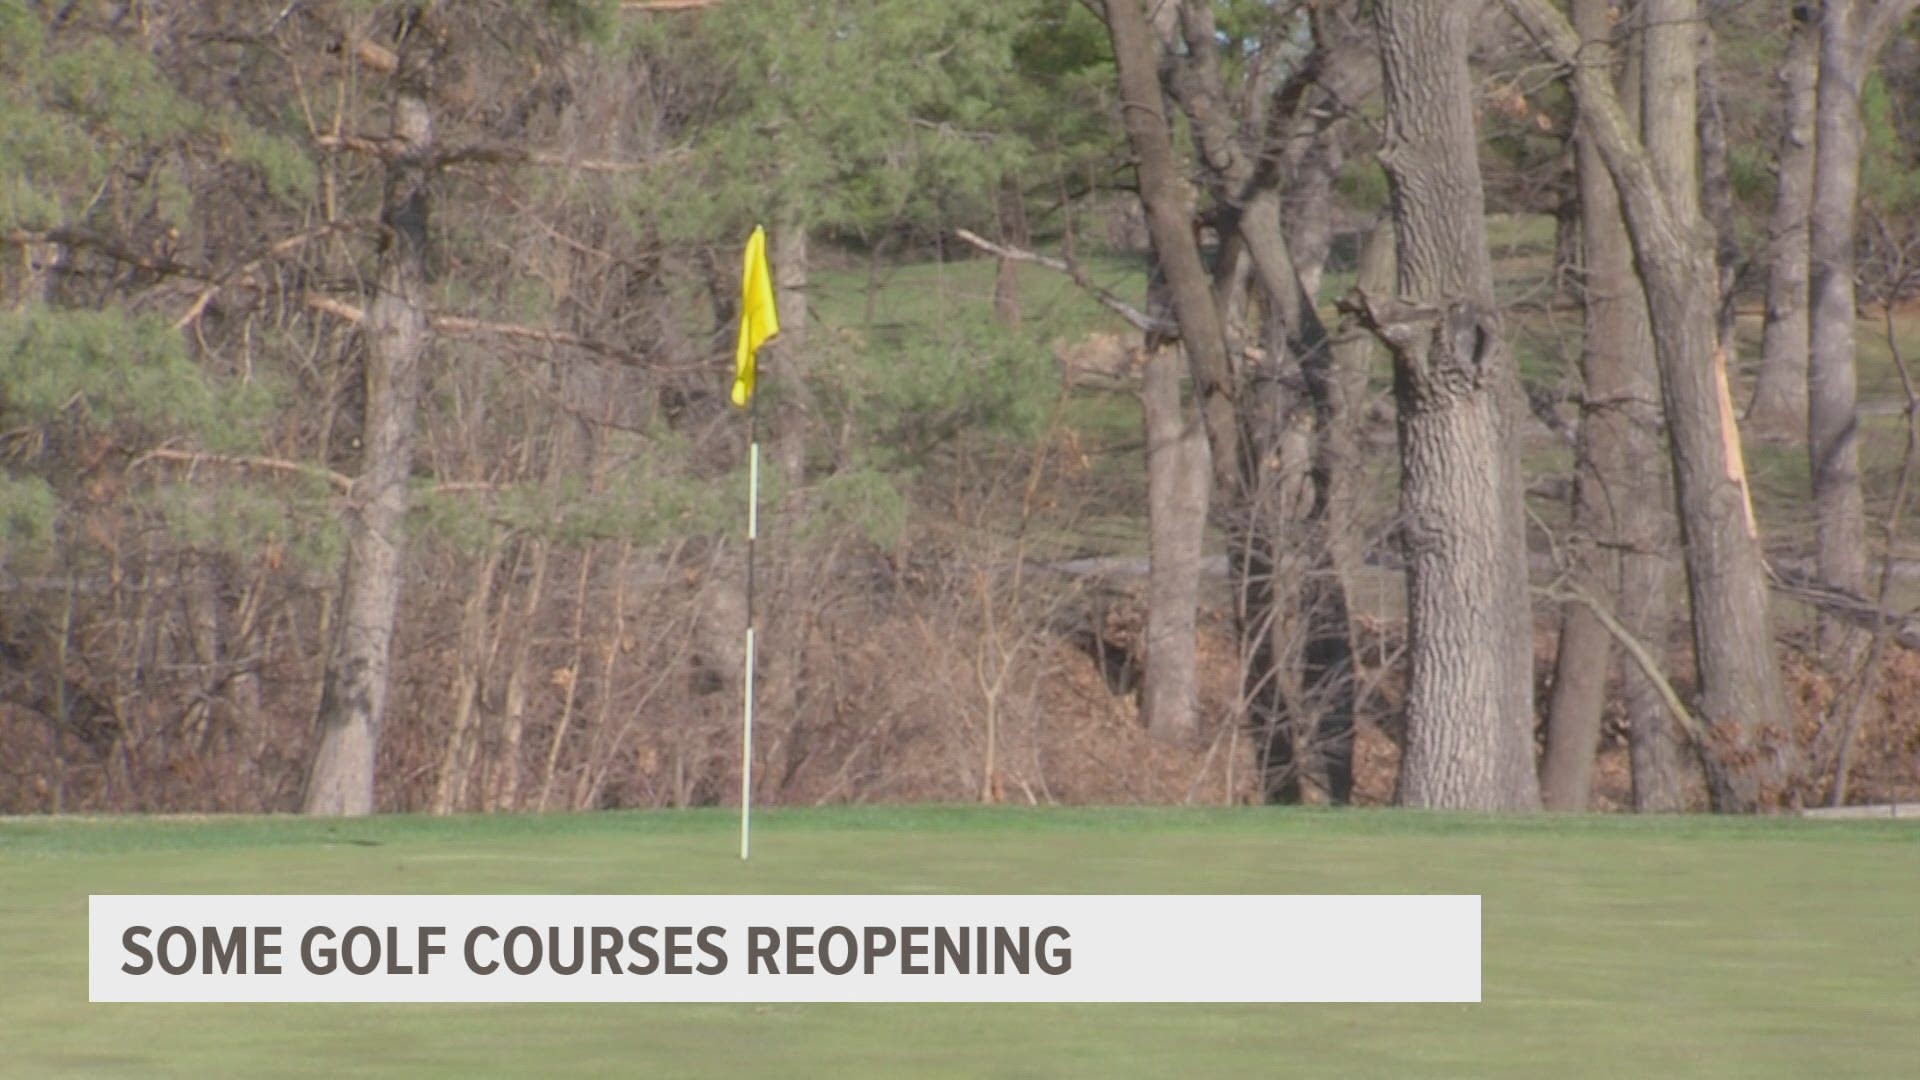 Seven of the nine holes at the Ames golf course opened Thursday while the other two are getting some more work done.